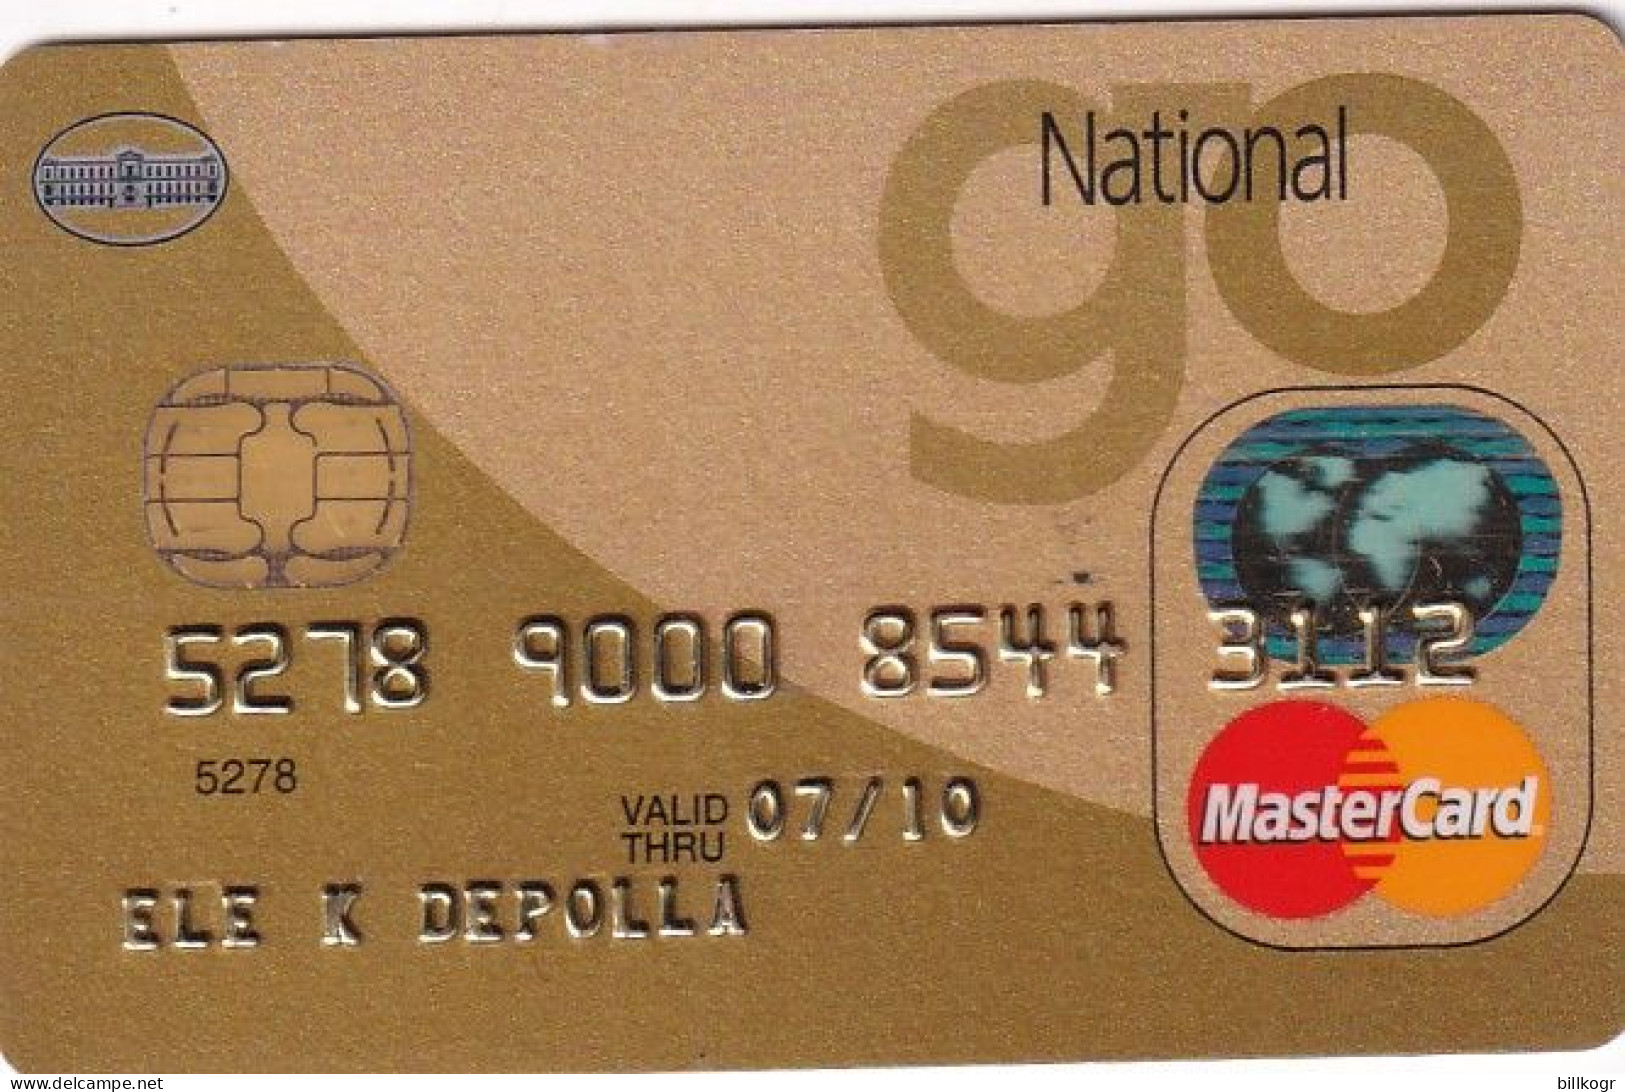 GREECE - National Bank Gold MasterCard, 02/07, Used - Credit Cards (Exp. Date Min. 10 Years)